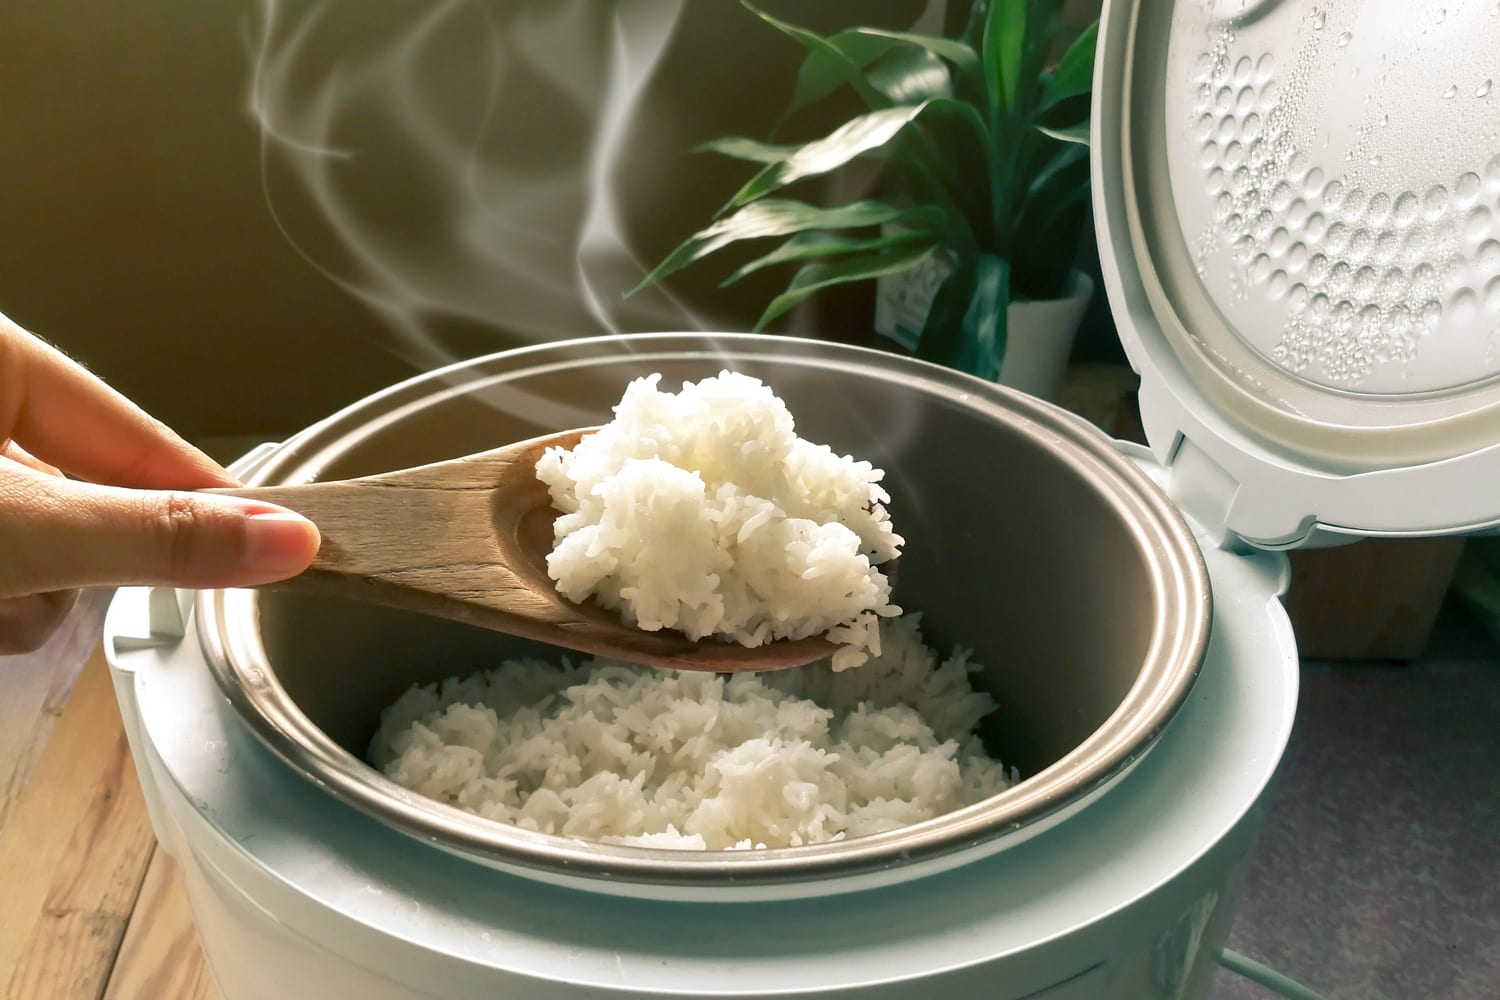 Jasmine rice cooking in electric rice cooker with steam. Soft Focus, Rustic tone picture.